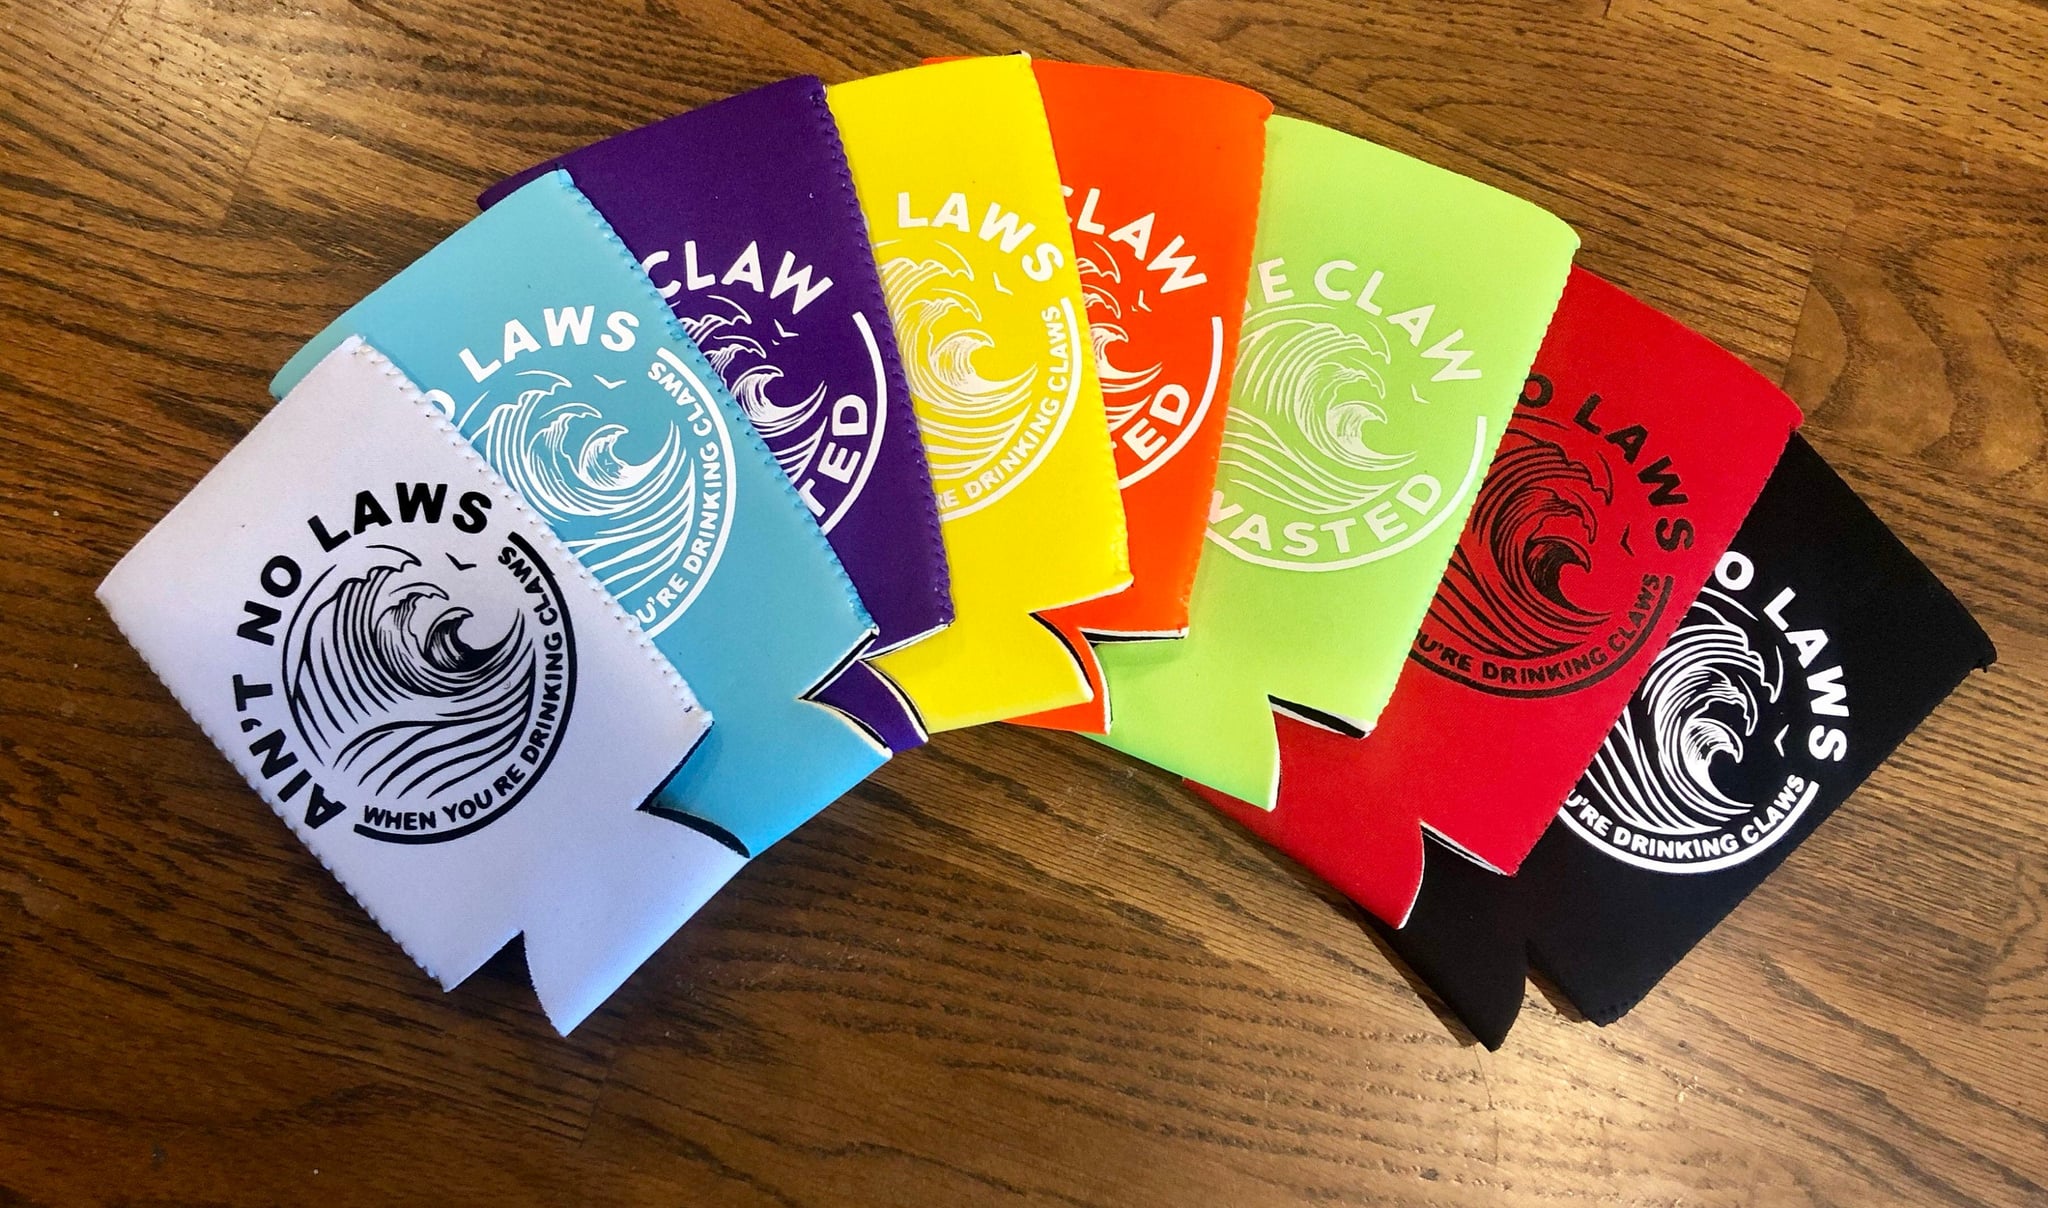 White Claw, Dining, New White Claw Set Of 4 Koozies